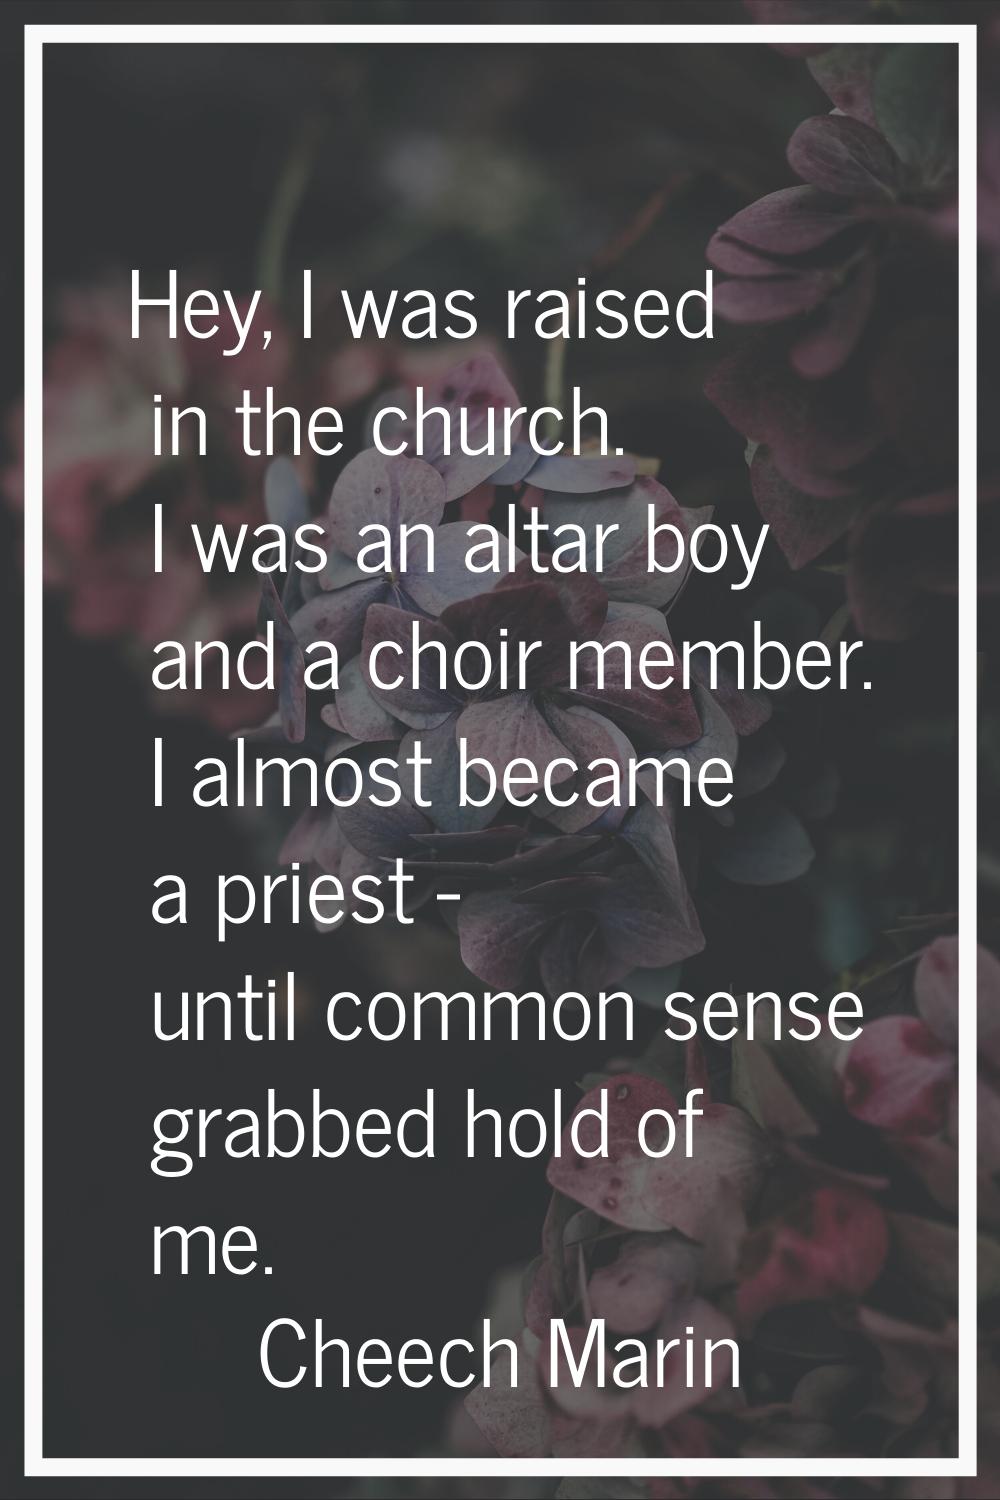 Hey, I was raised in the church. I was an altar boy and a choir member. I almost became a priest - 